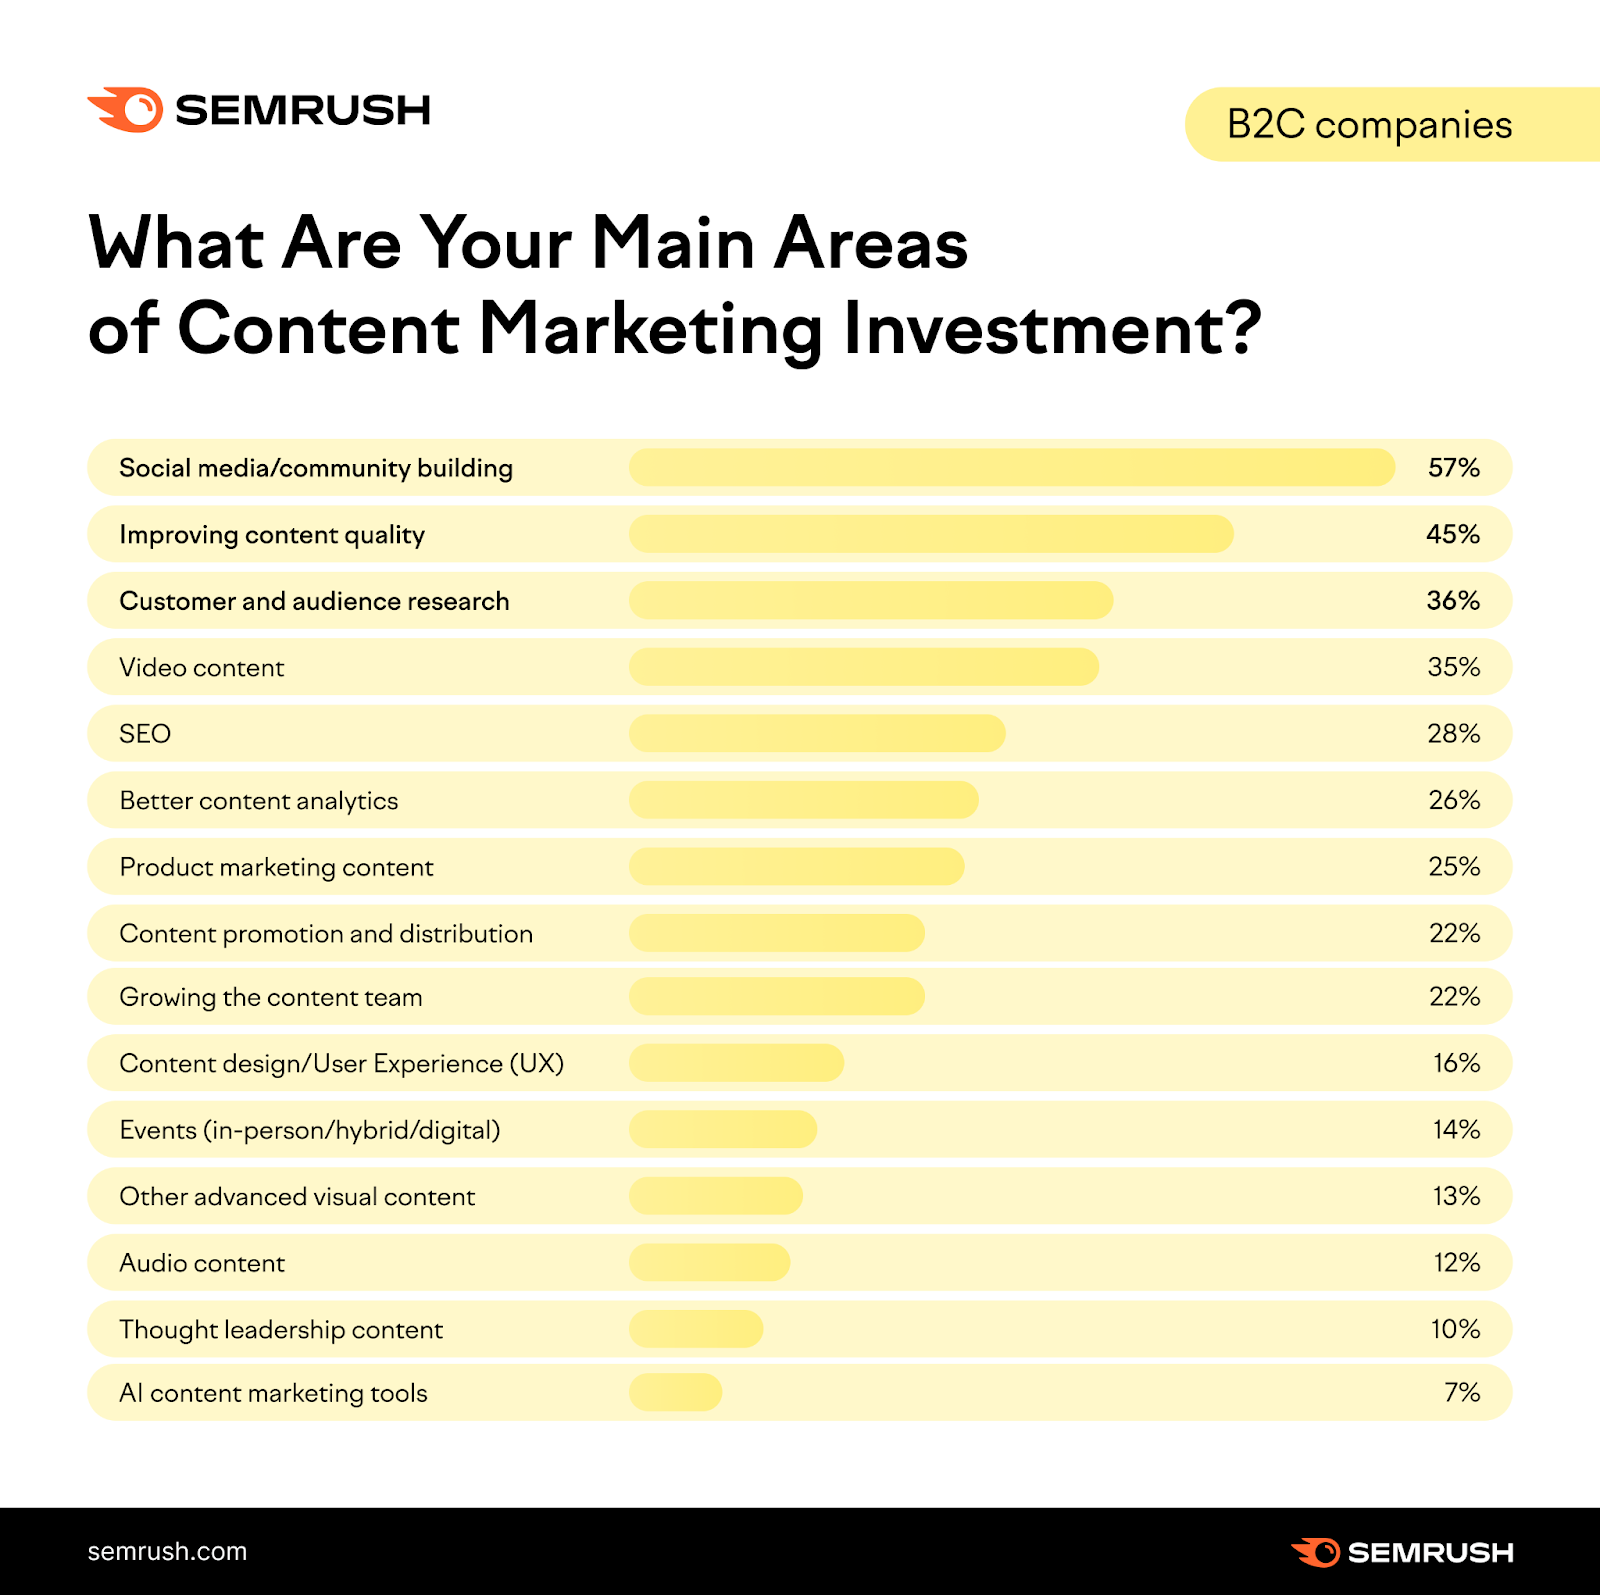 Content marketing investment areas for B2C companies